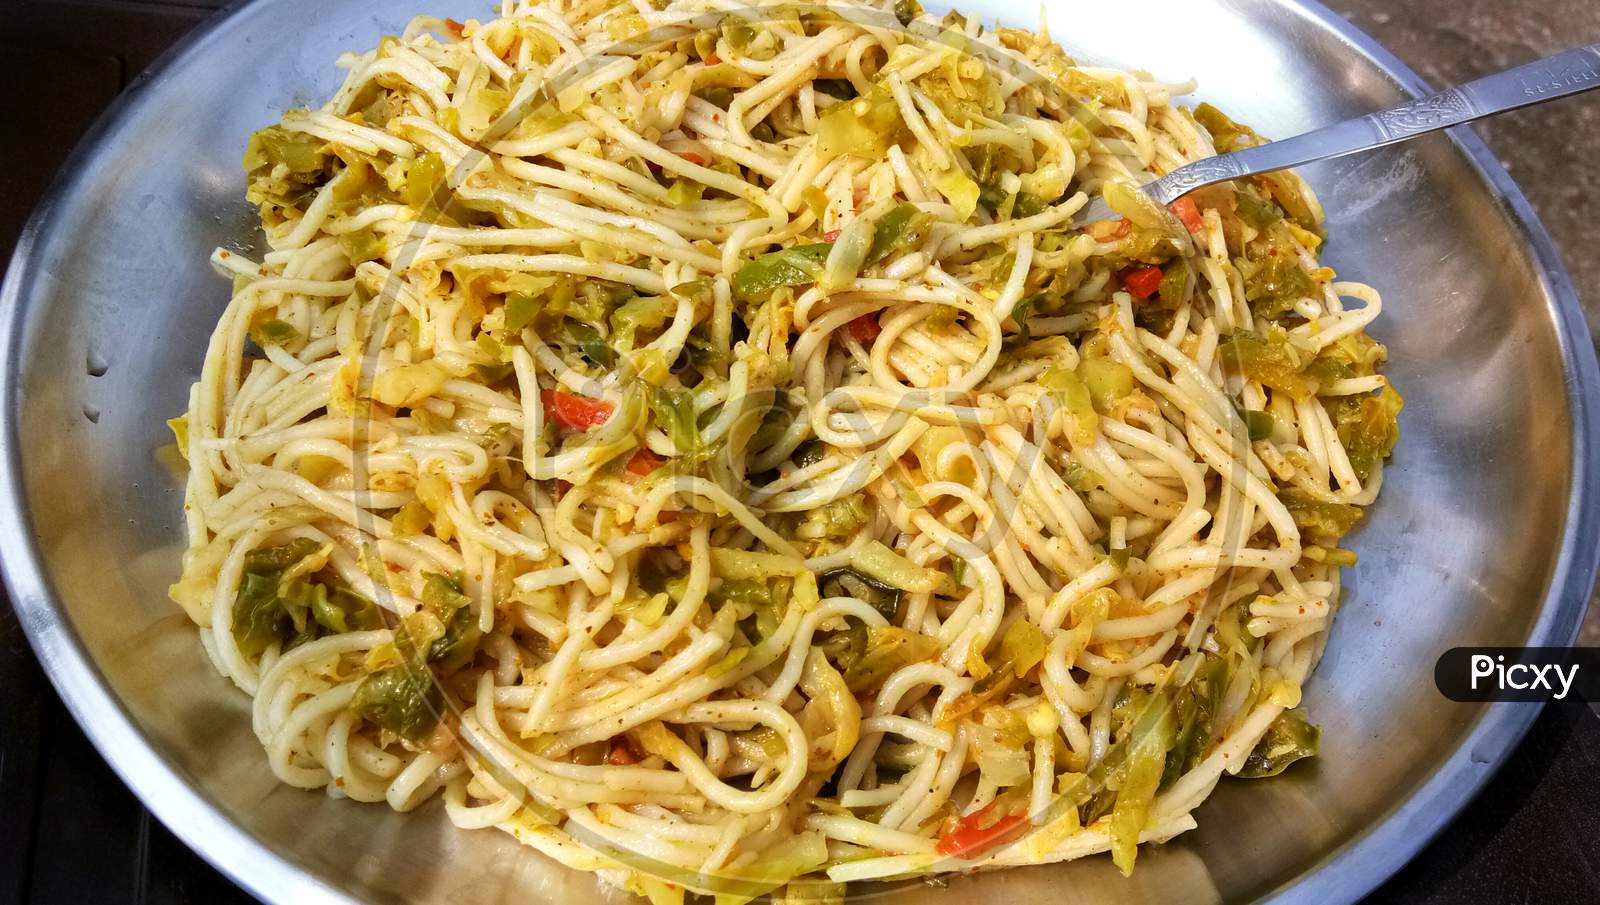 Schezwan Noodles Or Vegetable Hakka Noodles Or Chow Mein Is A Popular Indo-Chinese Recipes, Served In A Bowl Or Plate